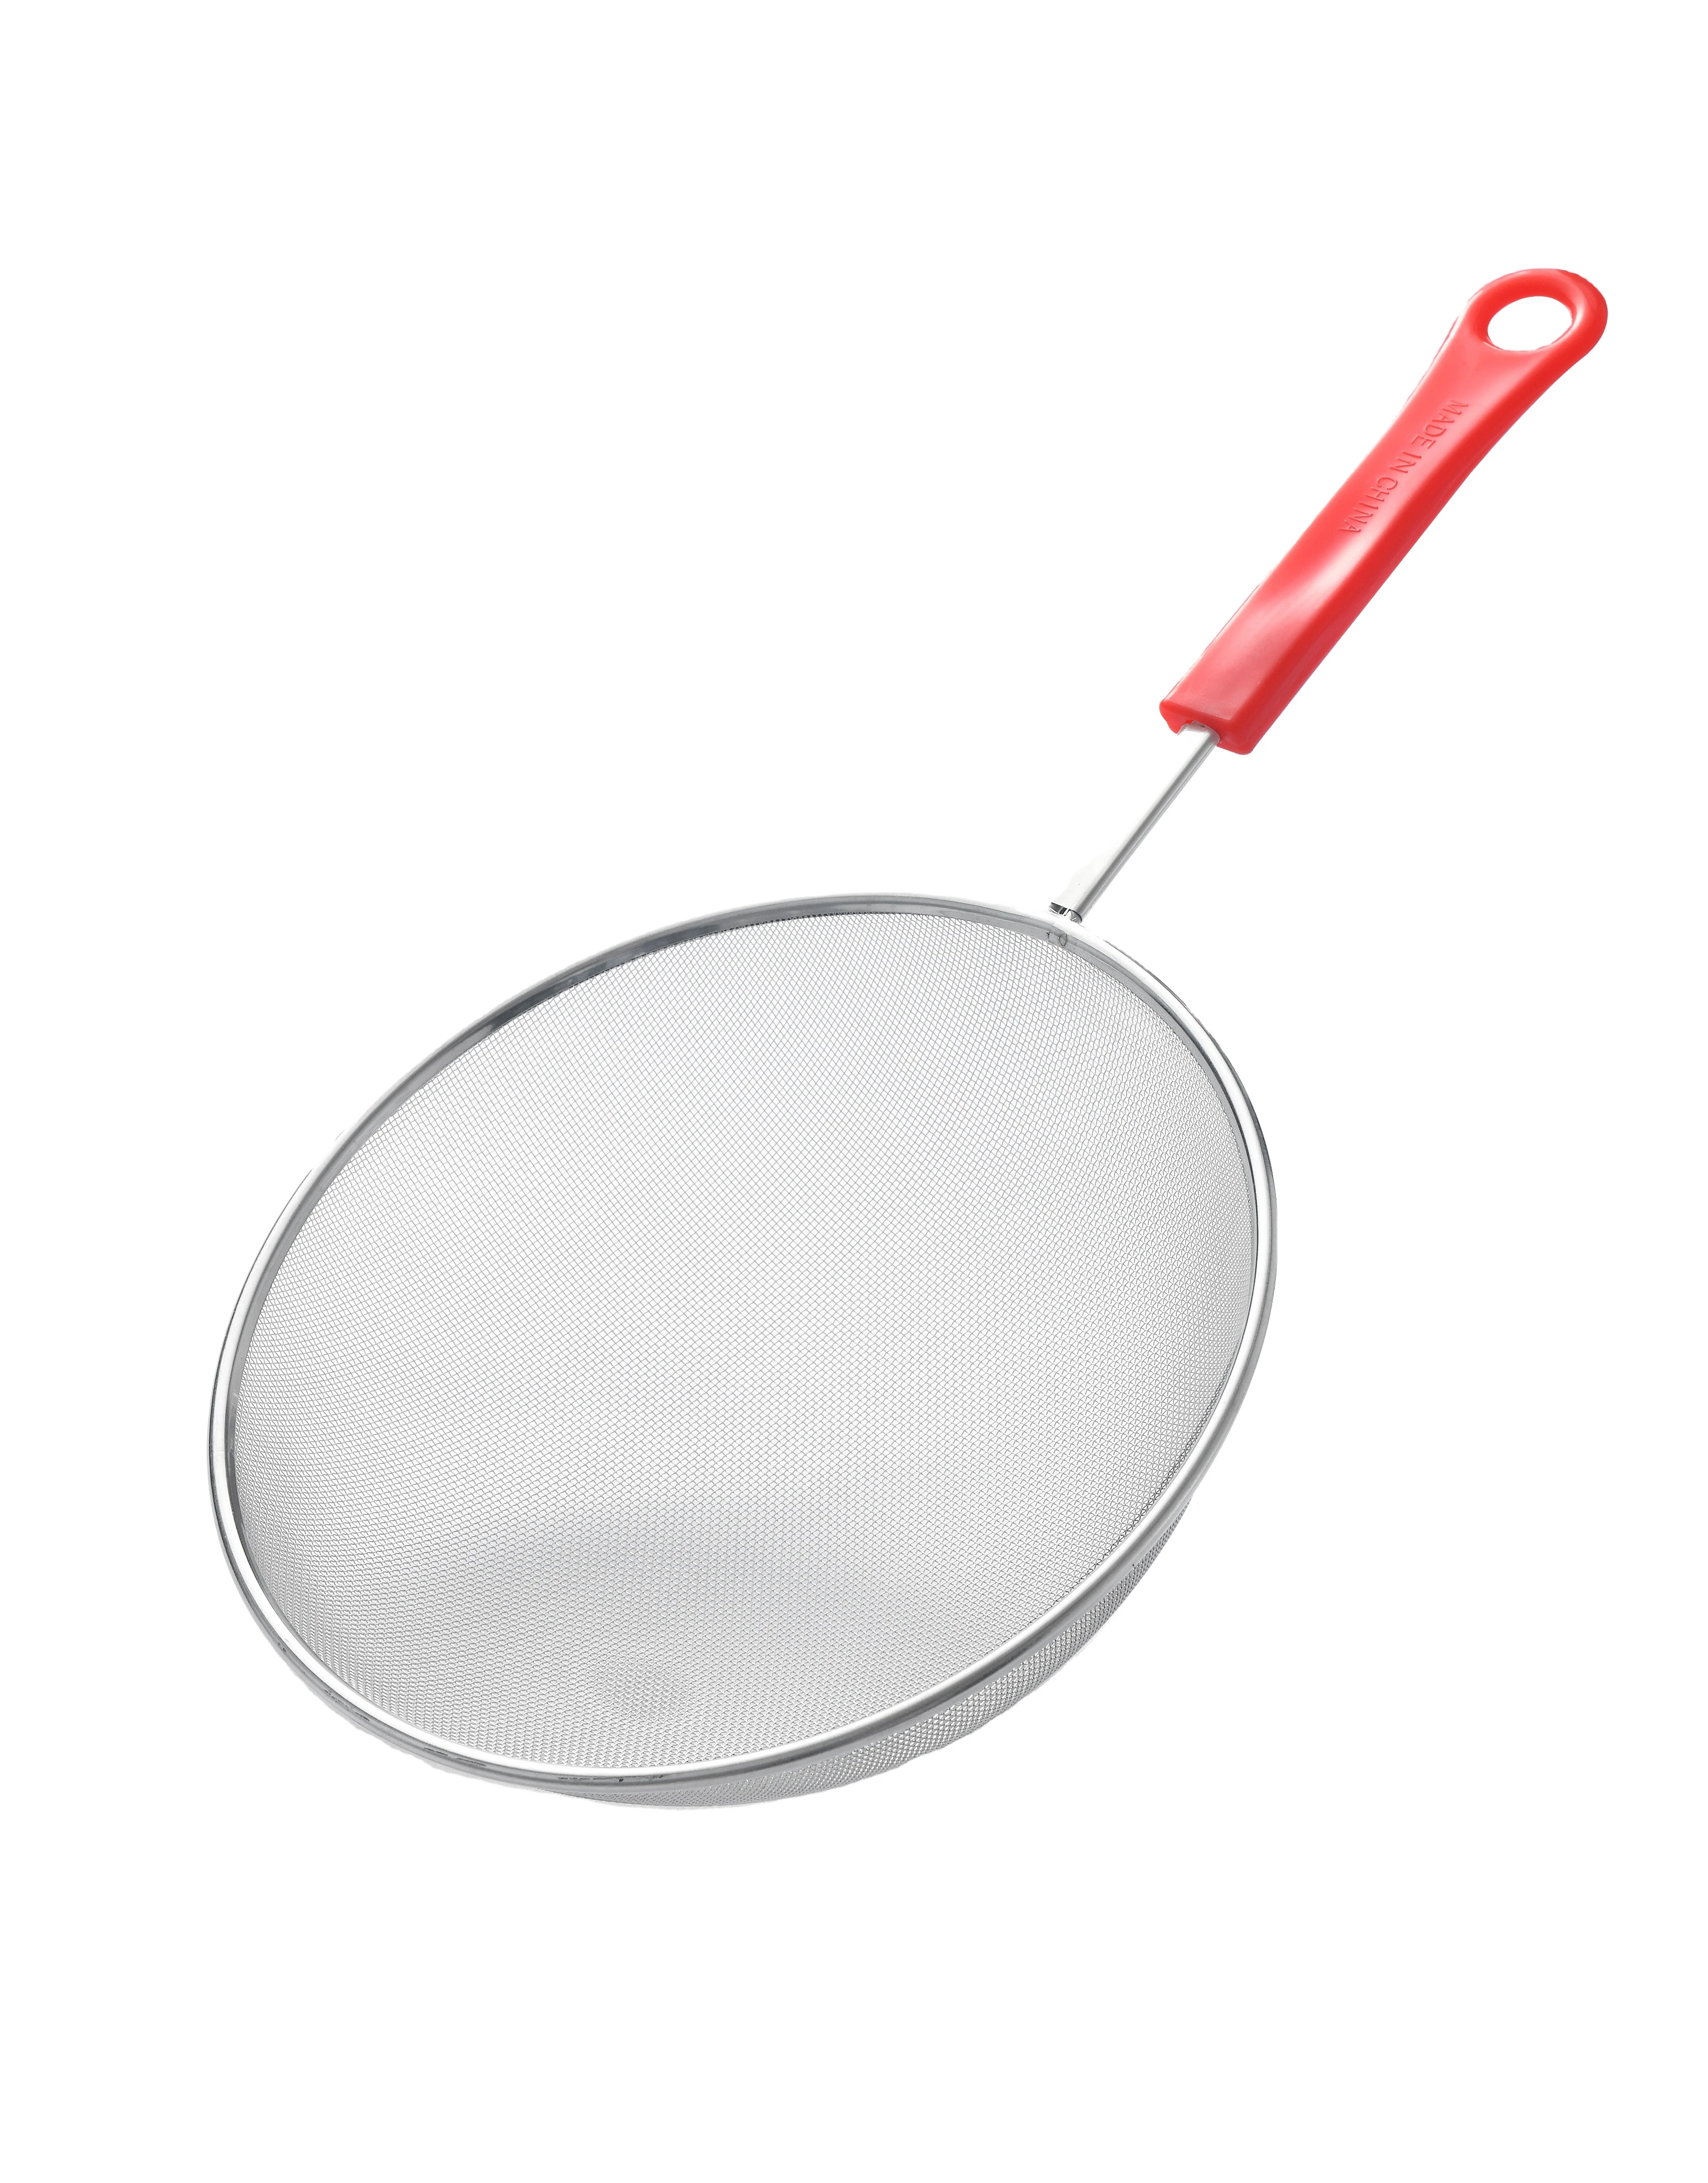 Minli High Quality Stainless Steel Mesh Strainer With Red Plastic Handle